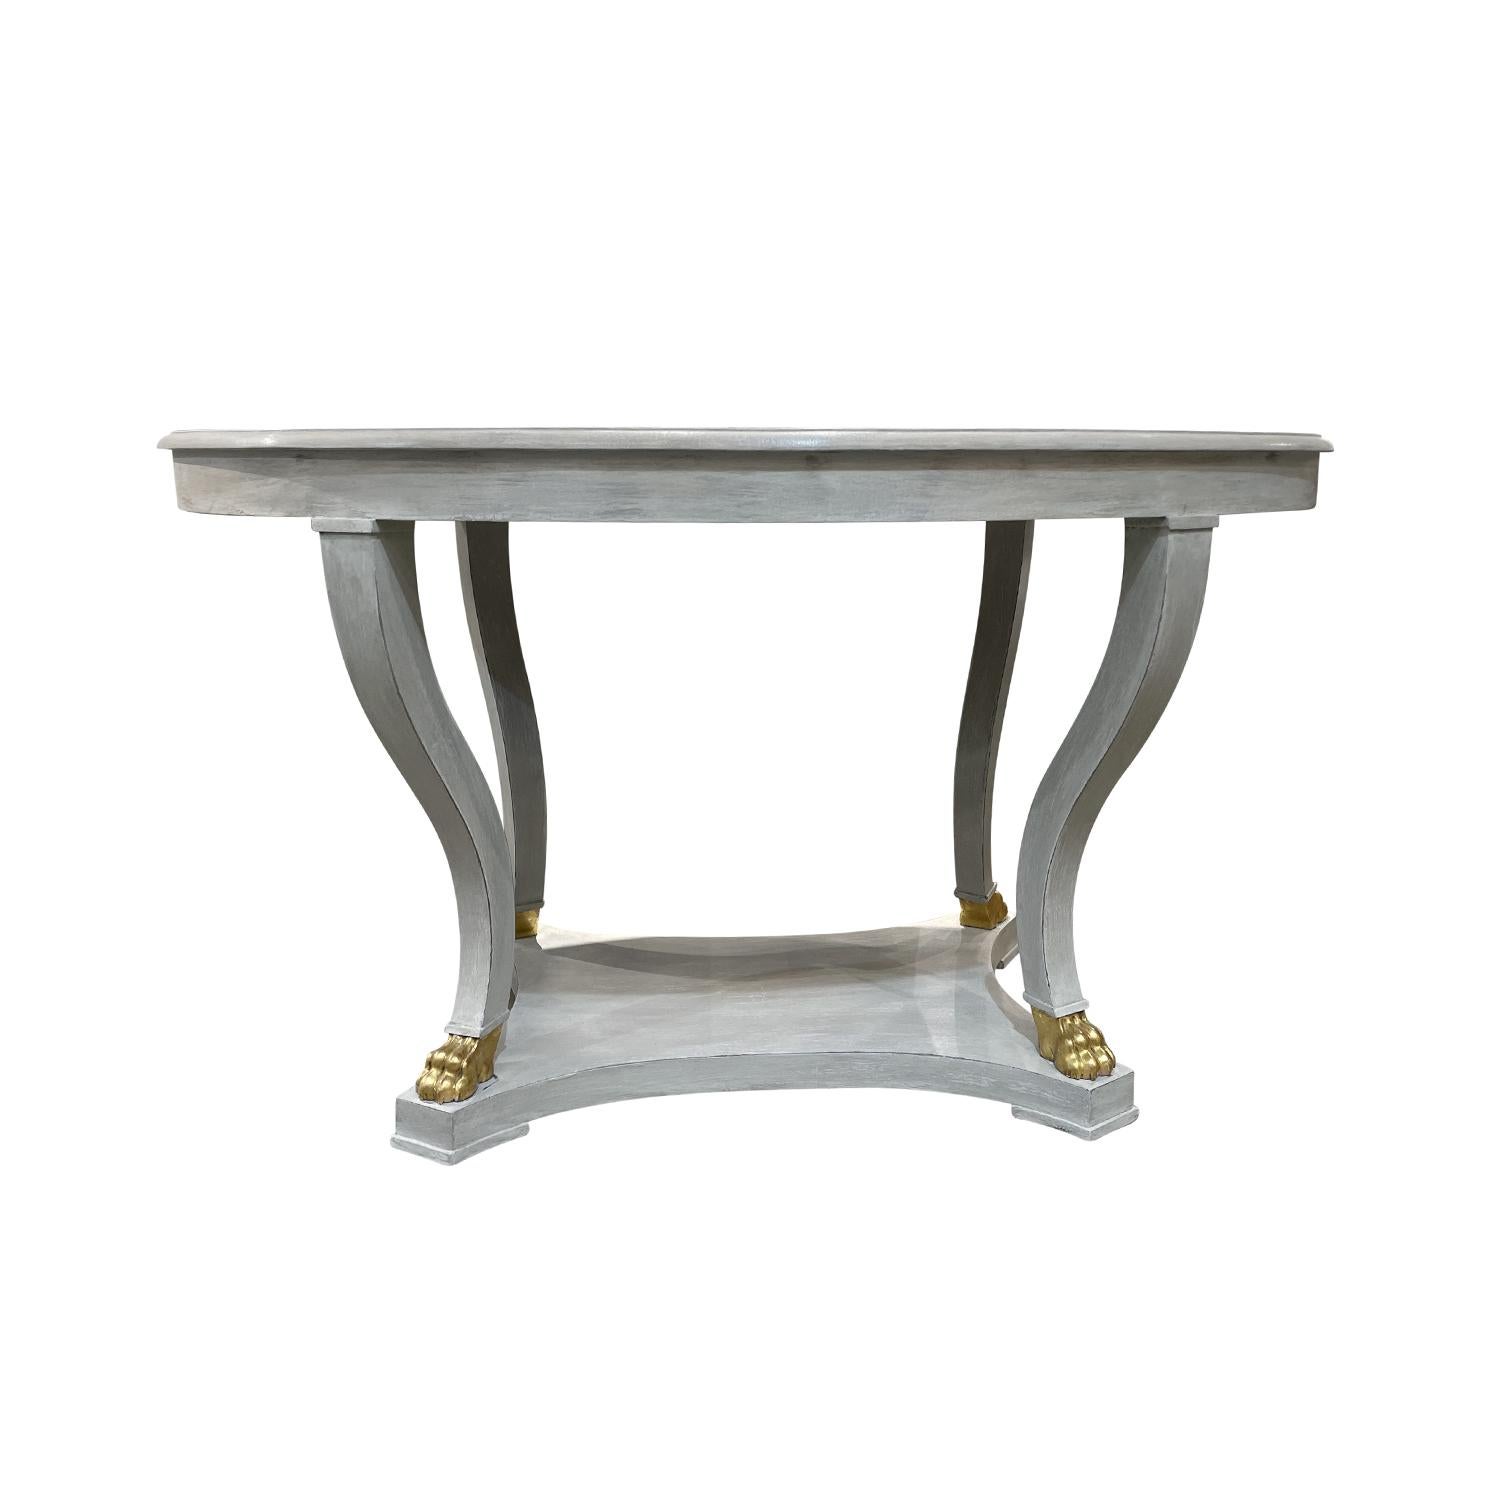 An antique 19th century Swedish Gustavian oval wooden dining table, in good condition. The Scandinavian painted Pinewood center table has a grey waxed patina. The four legs are accentuated with gilded hand carved lion paws. Wear consistent with age